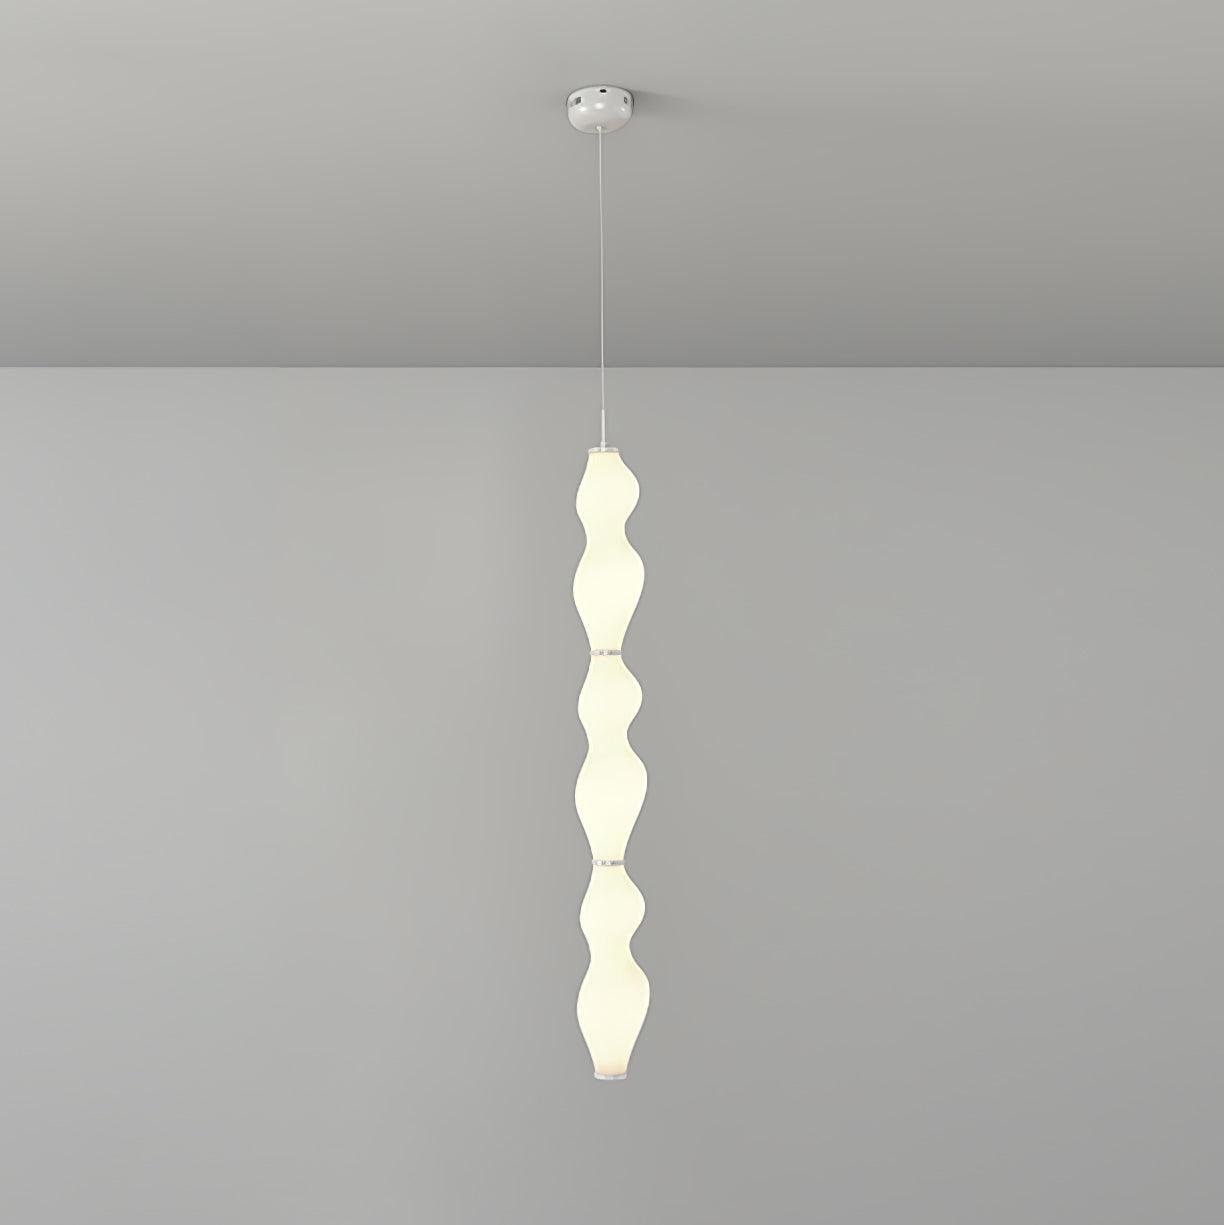 Empirico Pendant Lamp in White, with a 6.3-inch diameter and 55.1-inch height (or 16cm x 140cm), emitting cool light.